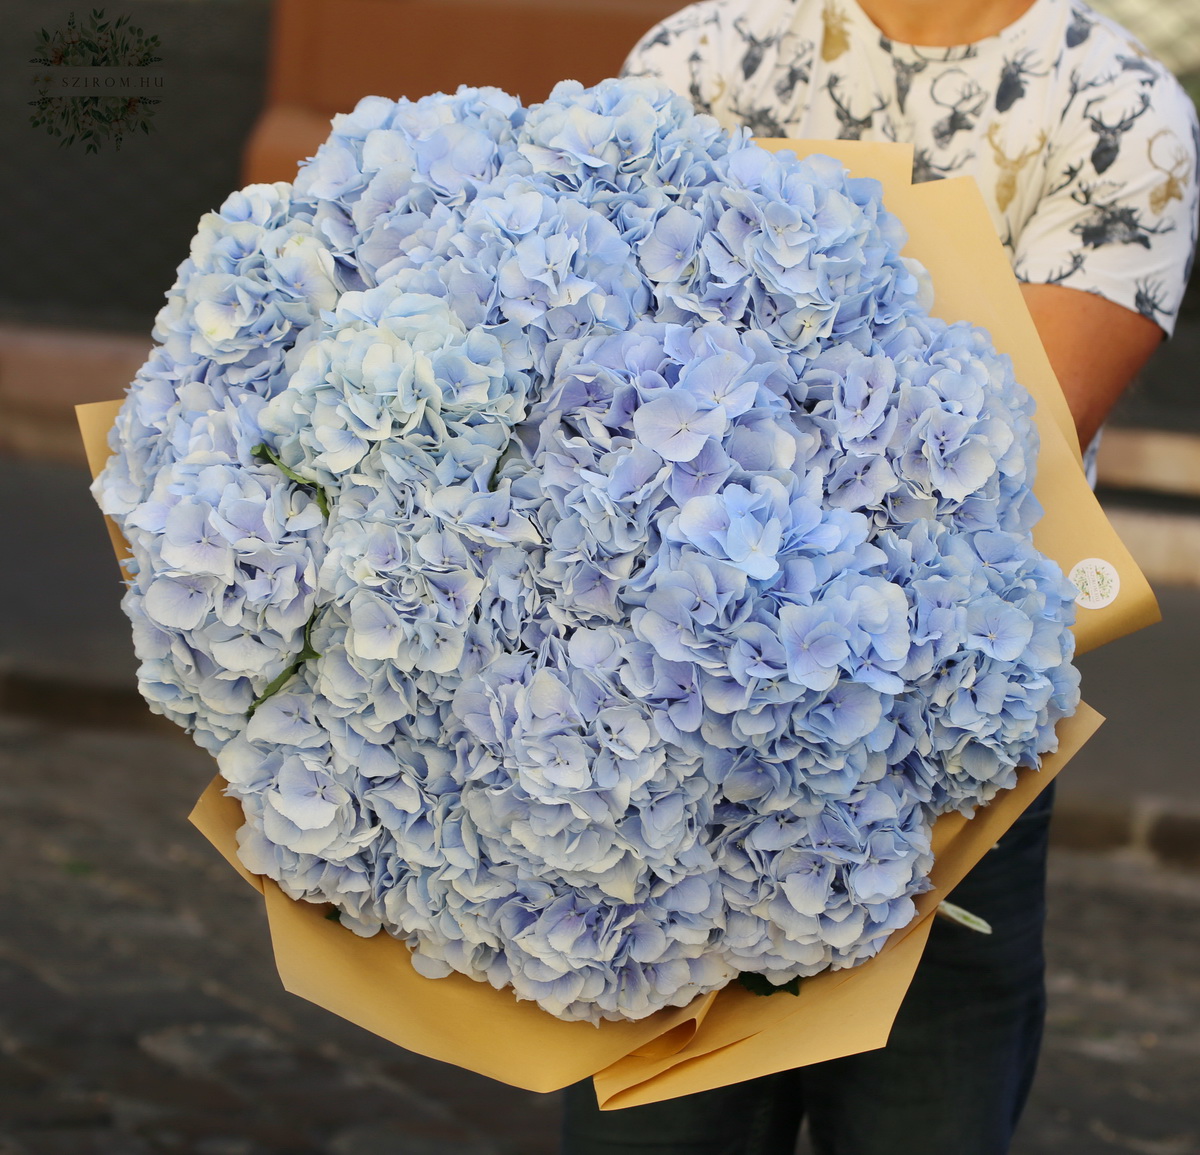 flower delivery Budapest - Giant Bouquet with hydrangea